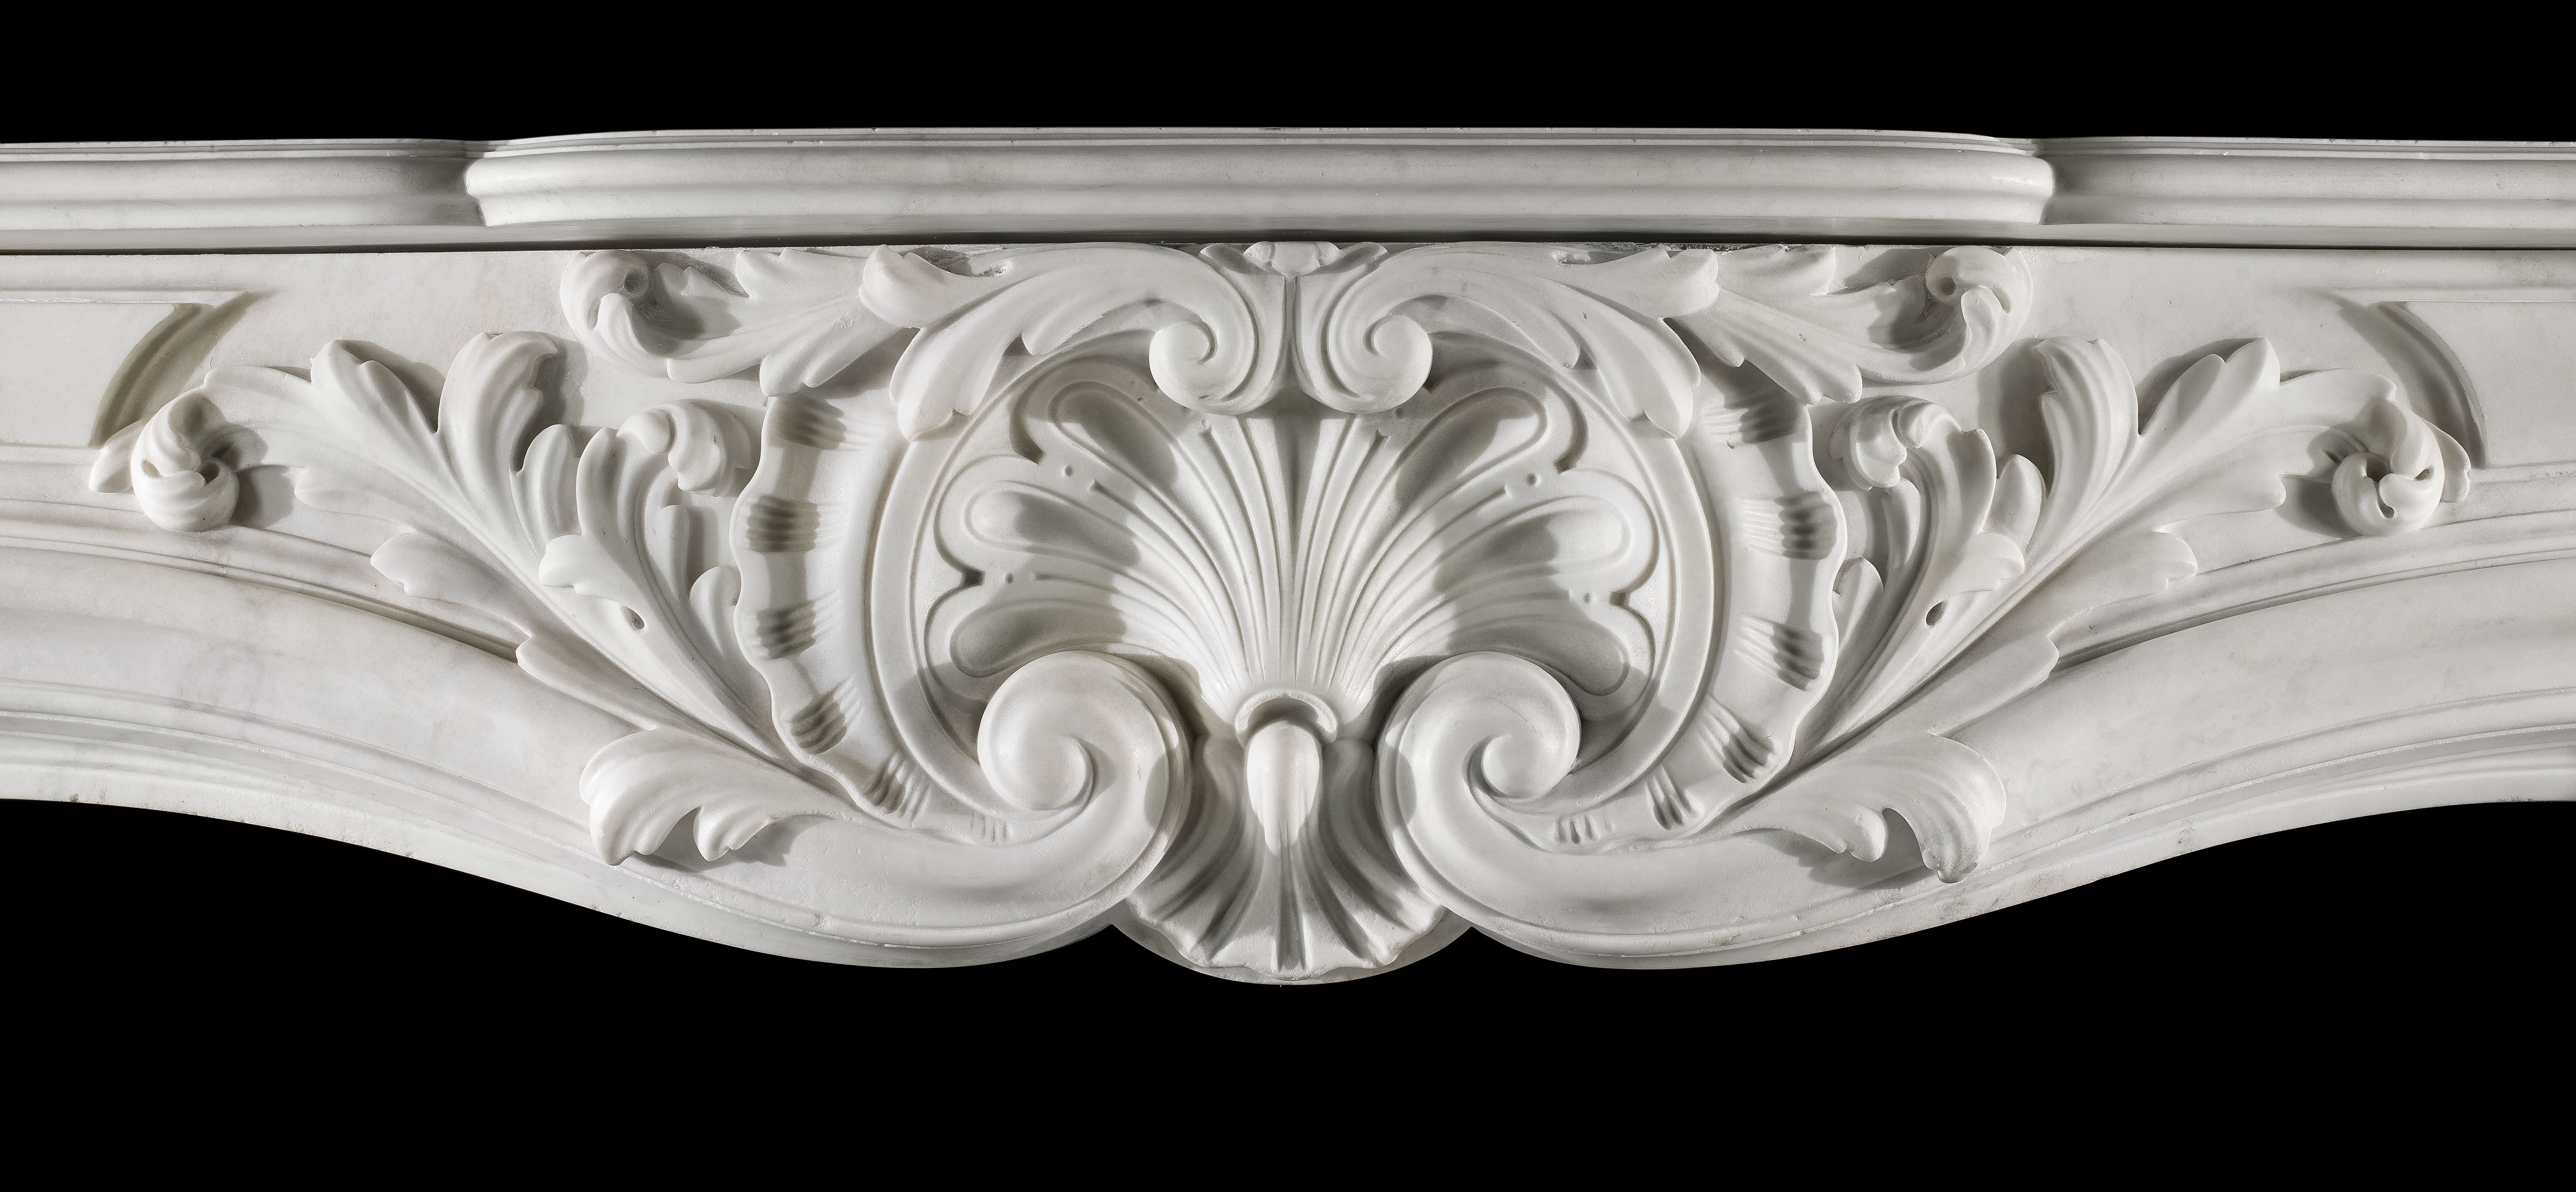 A French Rococo antique marble chimneypiece mantel